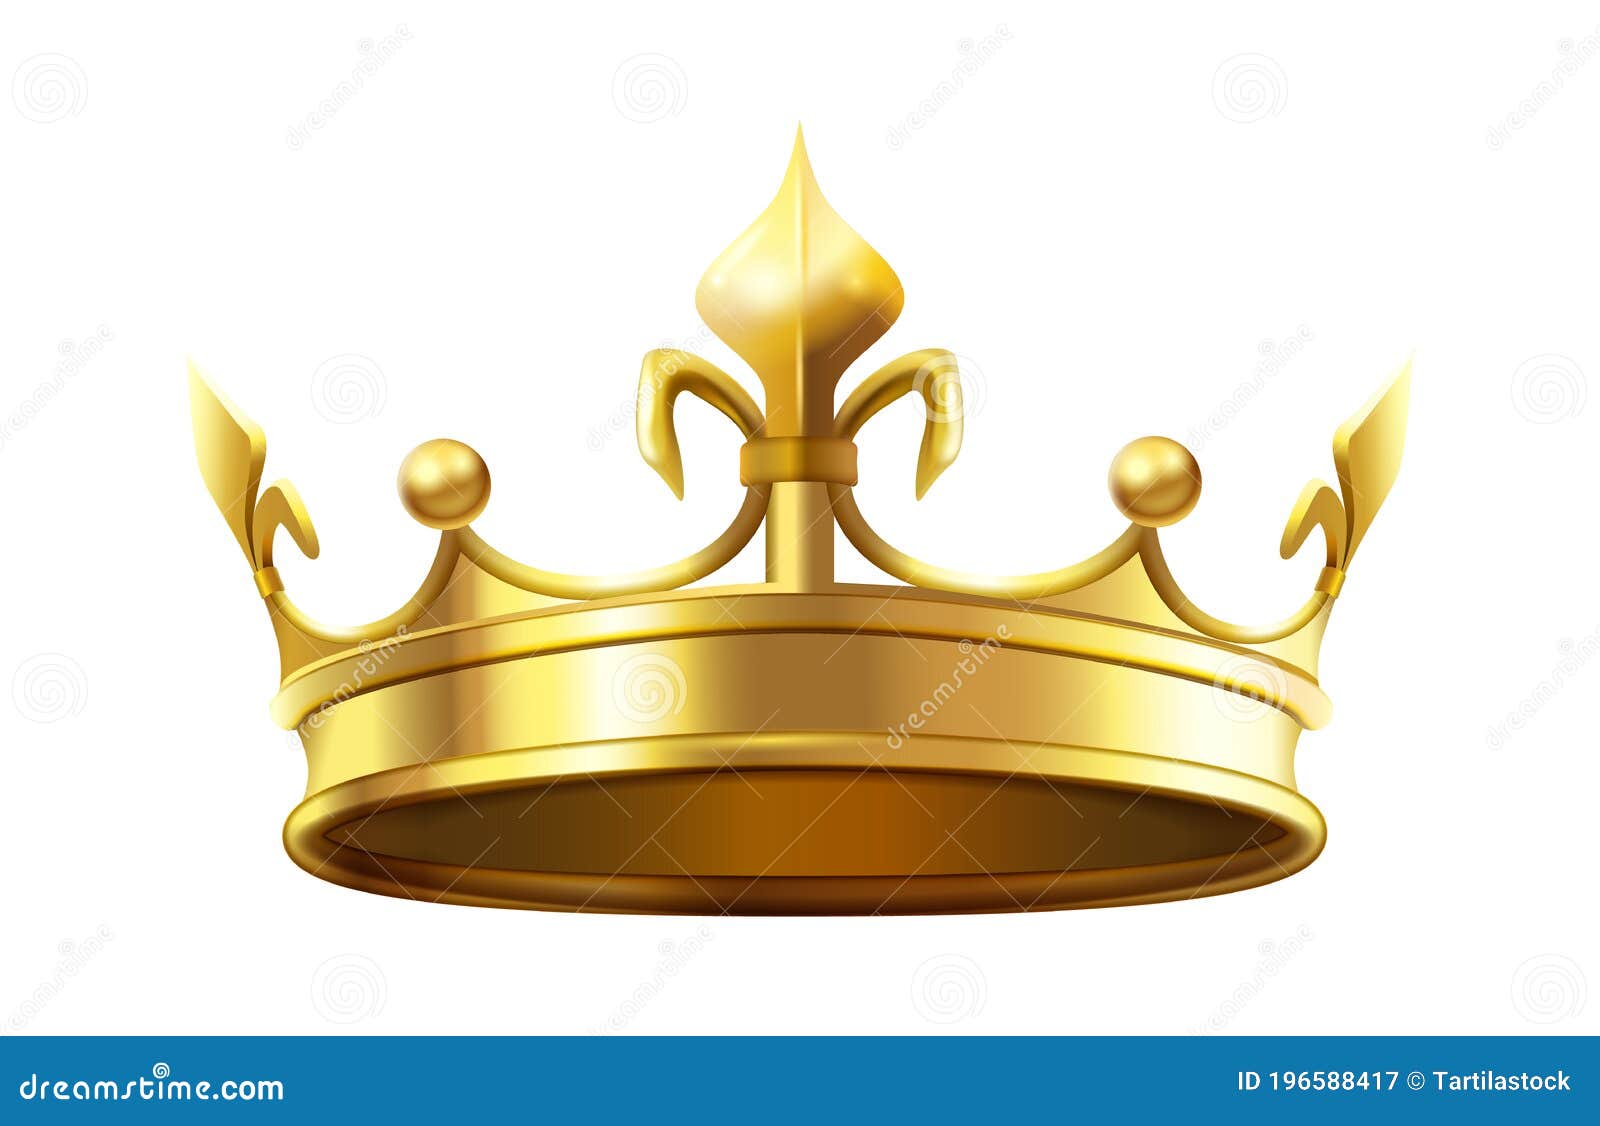 royal crown for king and queen. royalty and monarchy authority , heraldic golden shiny 